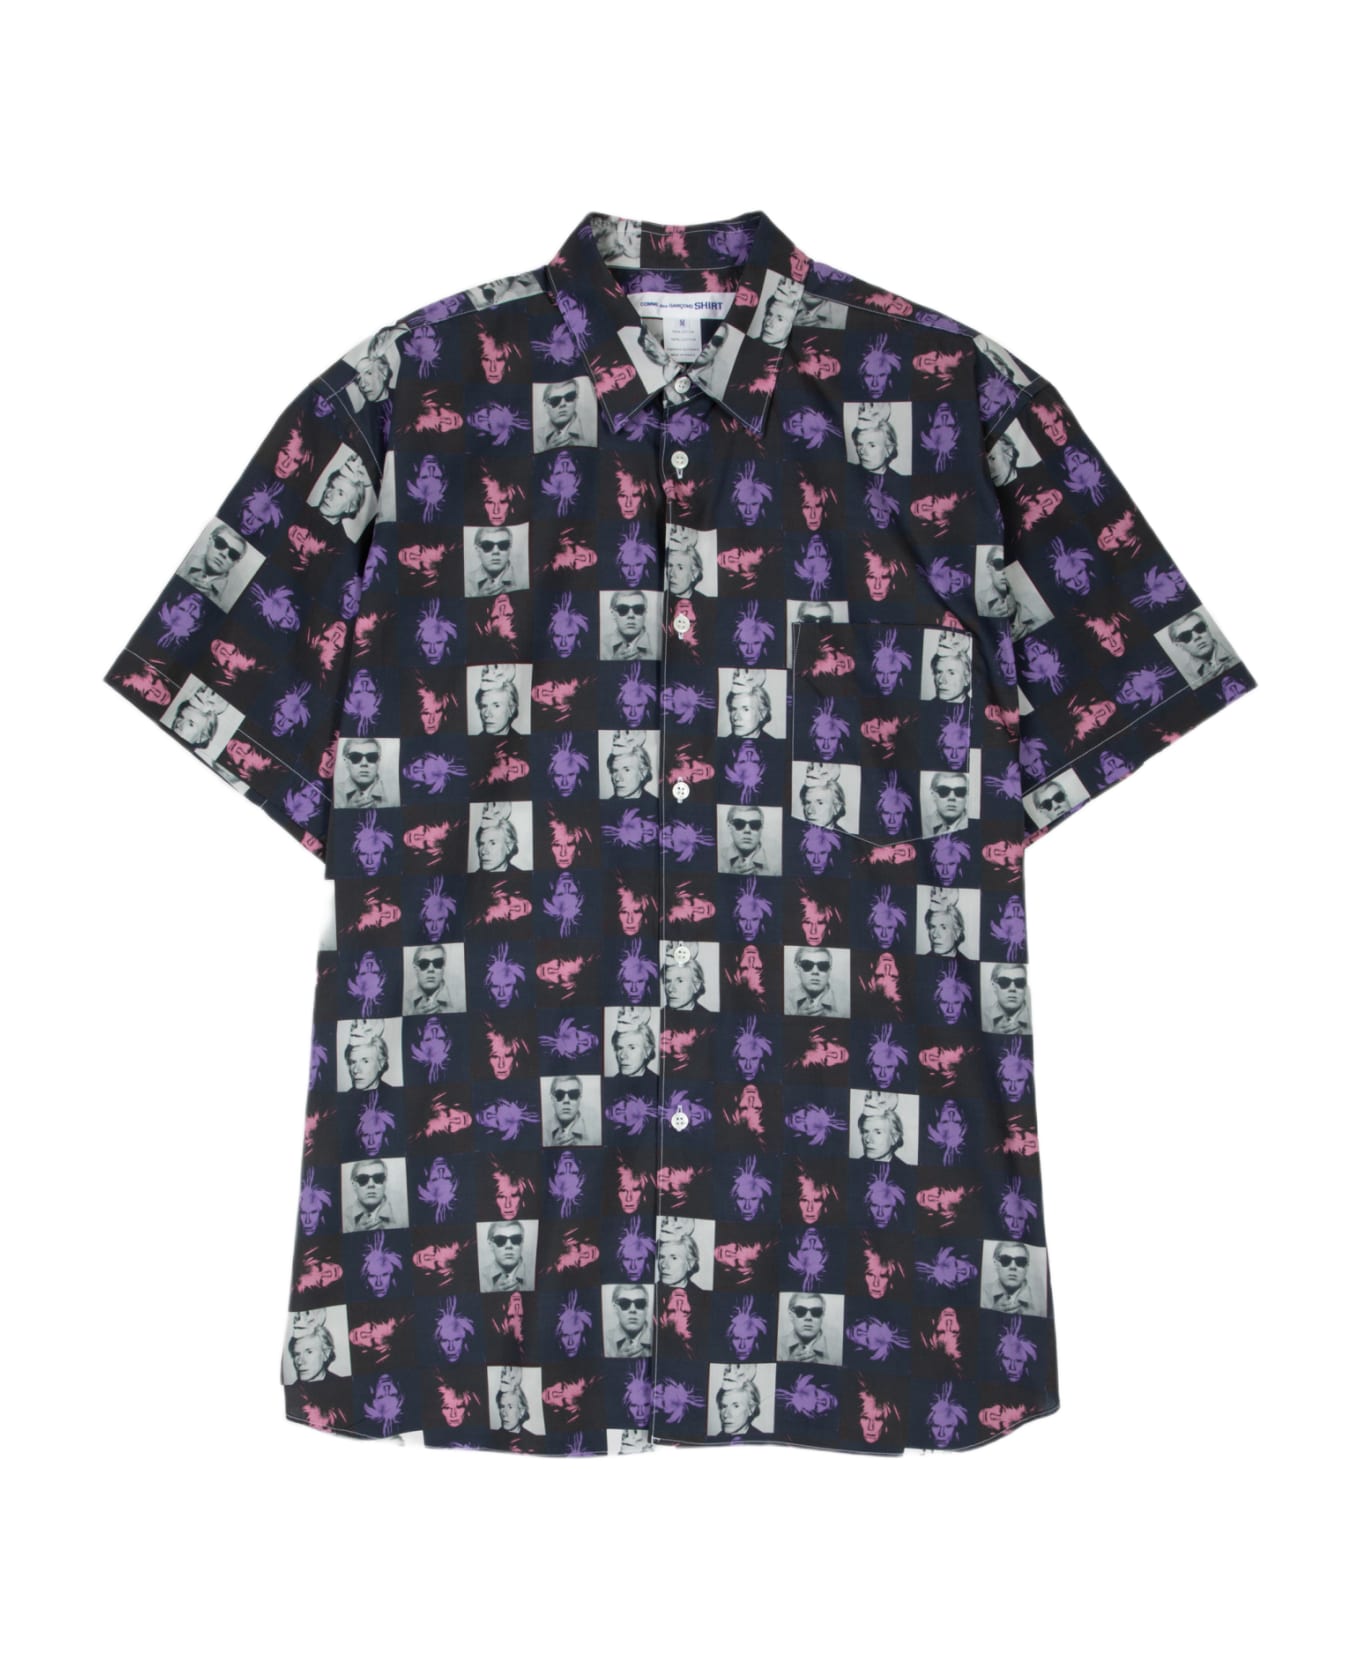 Comme des Garçons Shirt Mens Shirt Woven Multicolour Andy Warhol printed shirt with short sleeves - Multicolor